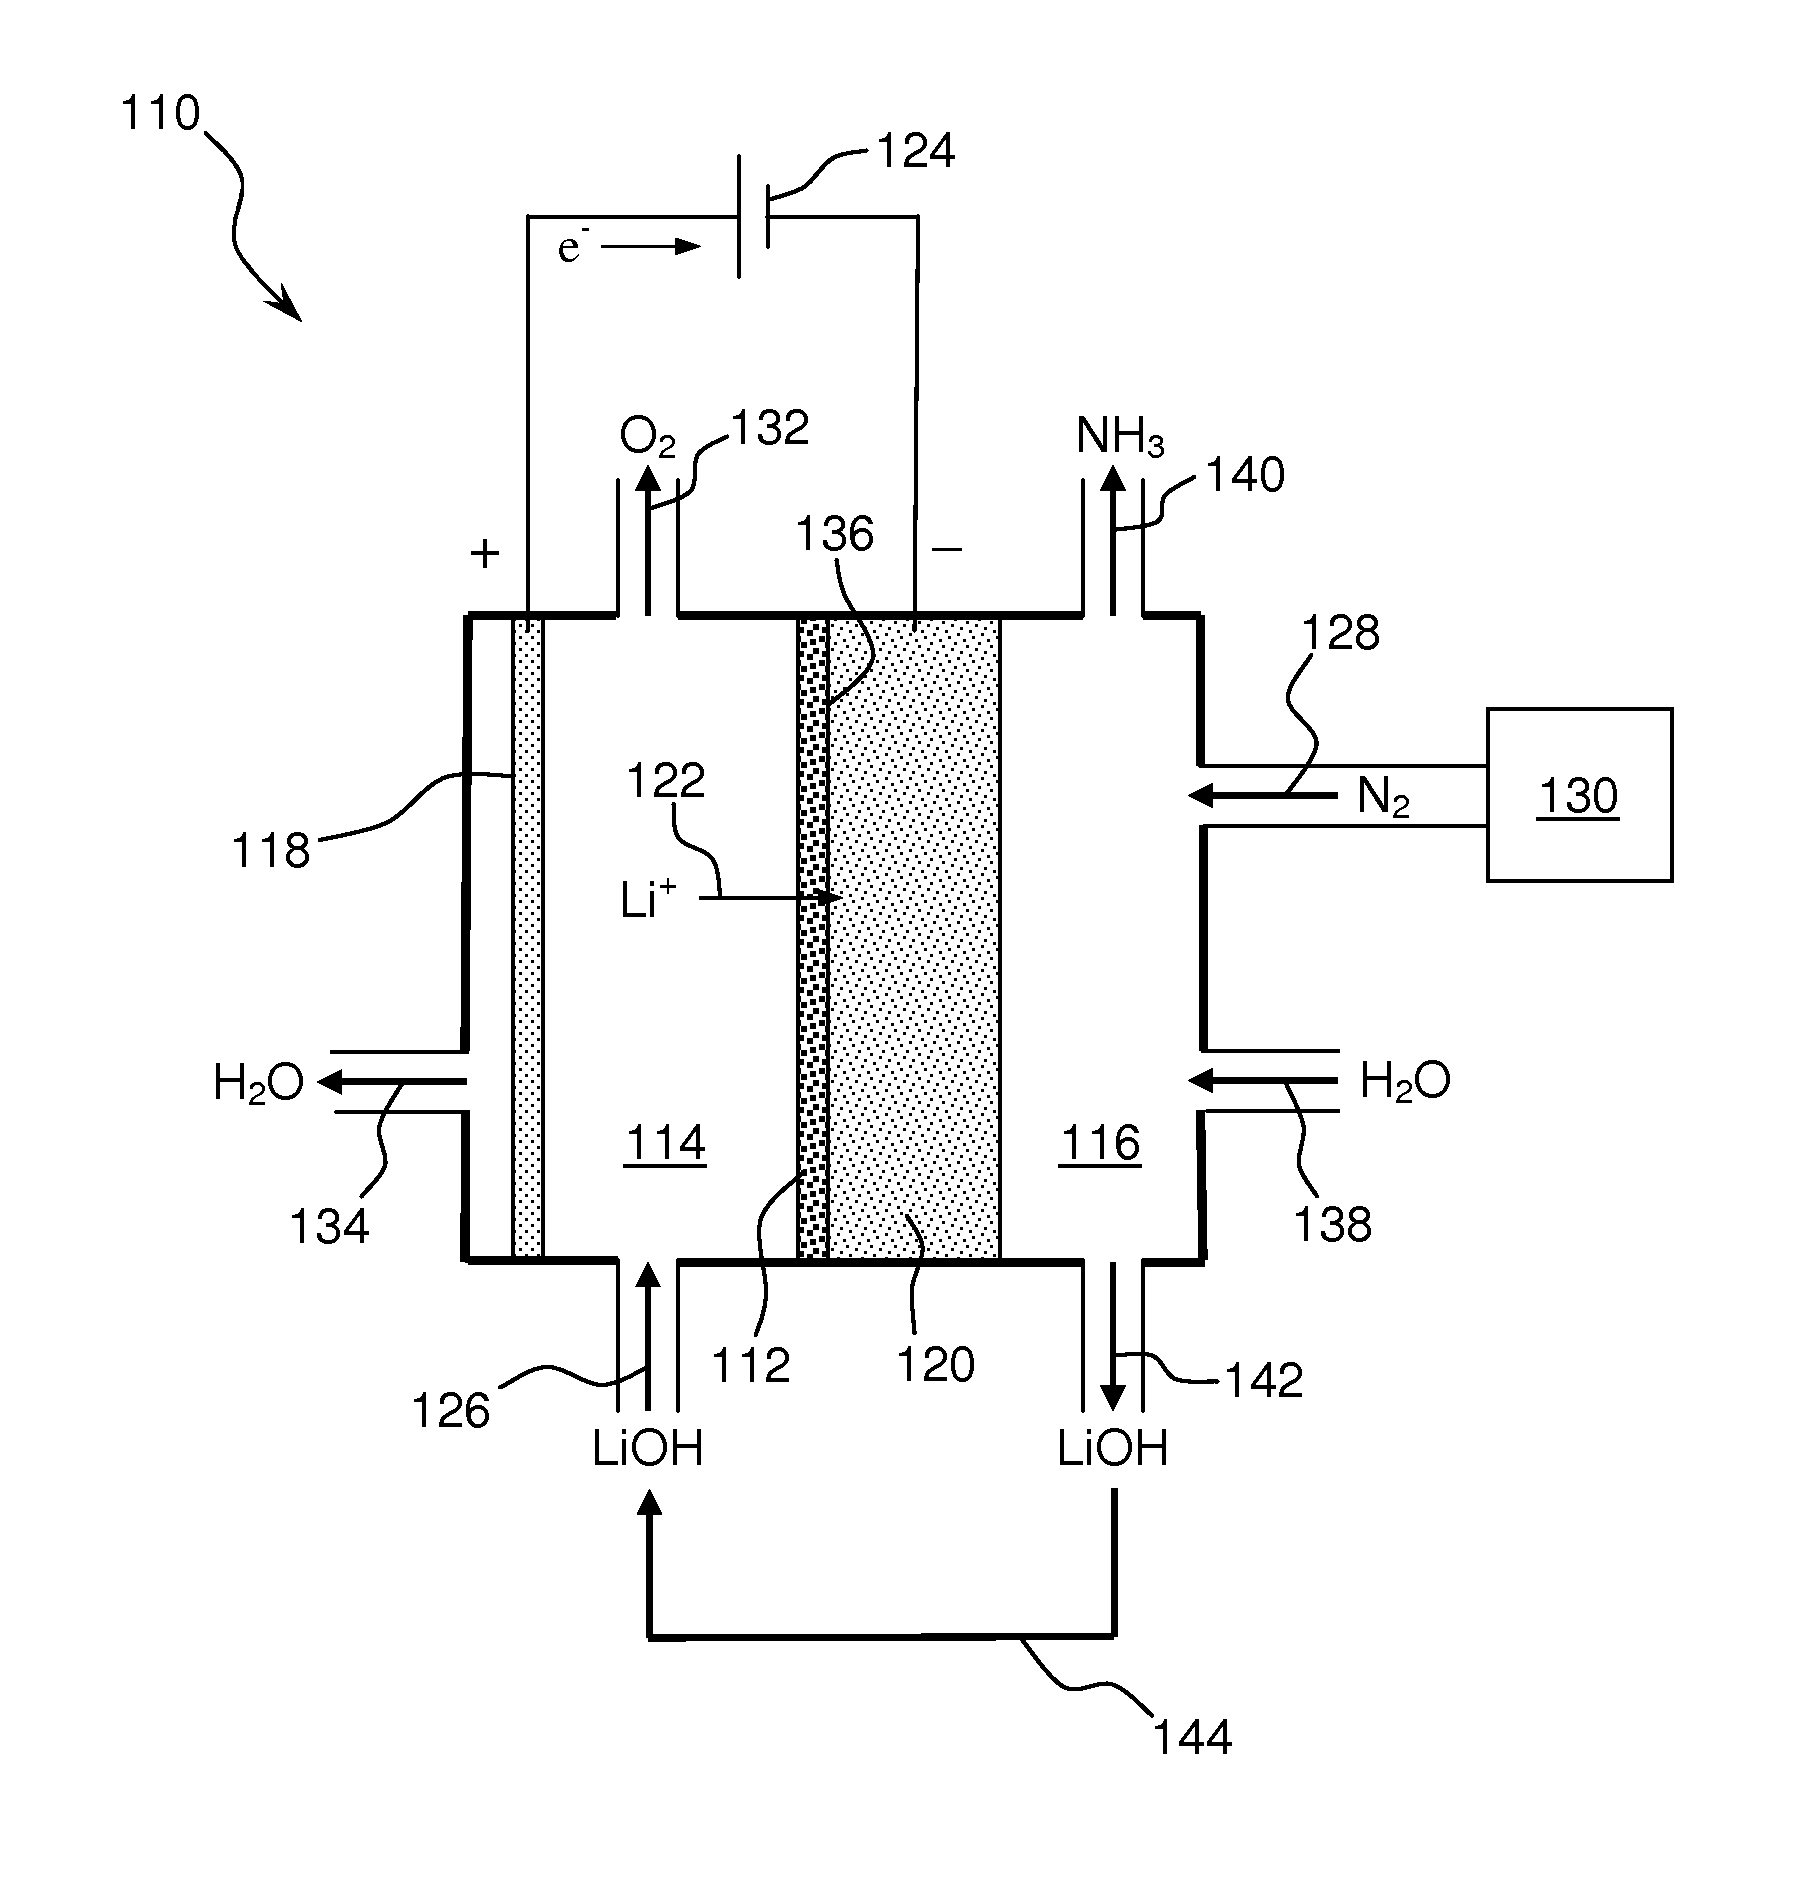 Ammonia synthesis using lithium ion conductive membrane